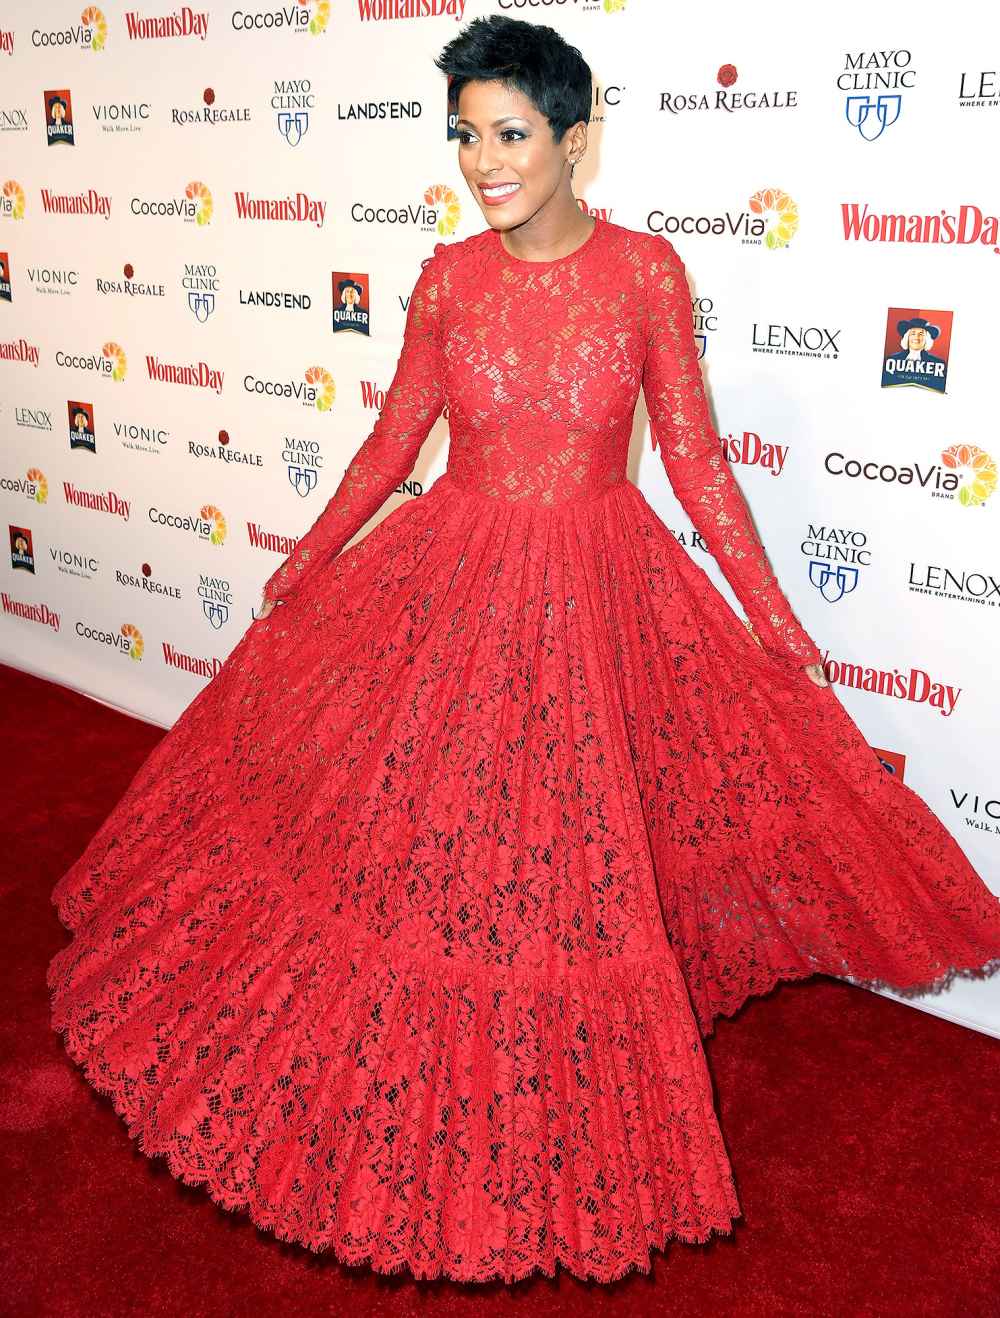 Tamron Hall attends the 14th annual Woman's Day Red Dress Awards at the Lincoln Center on February 7, 2017 in New York City.